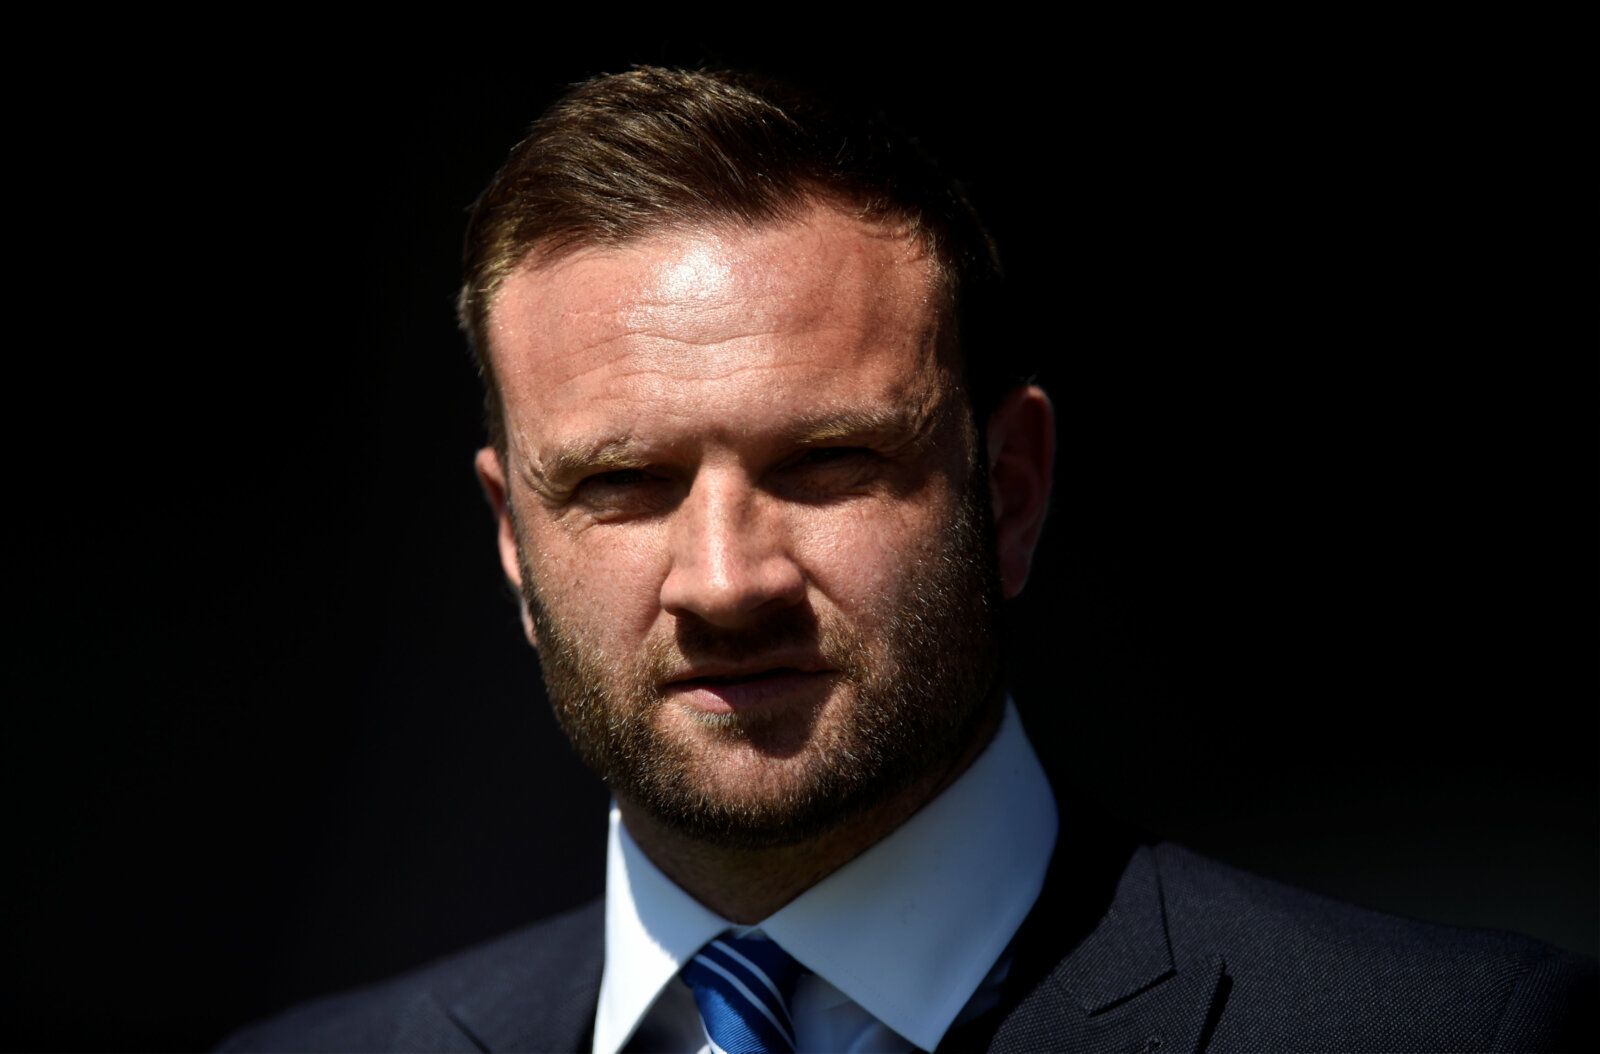 Soccer Football - League Two - Barnet vs Chesterfield - The Hive, London, Britain - May 5, 2018  Chesterfield manager Ian Evatt before the match   Action Images/Adam Holt  EDITORIAL USE ONLY. No use with unauthorized audio, video, data, fixture lists, club/league logos or 